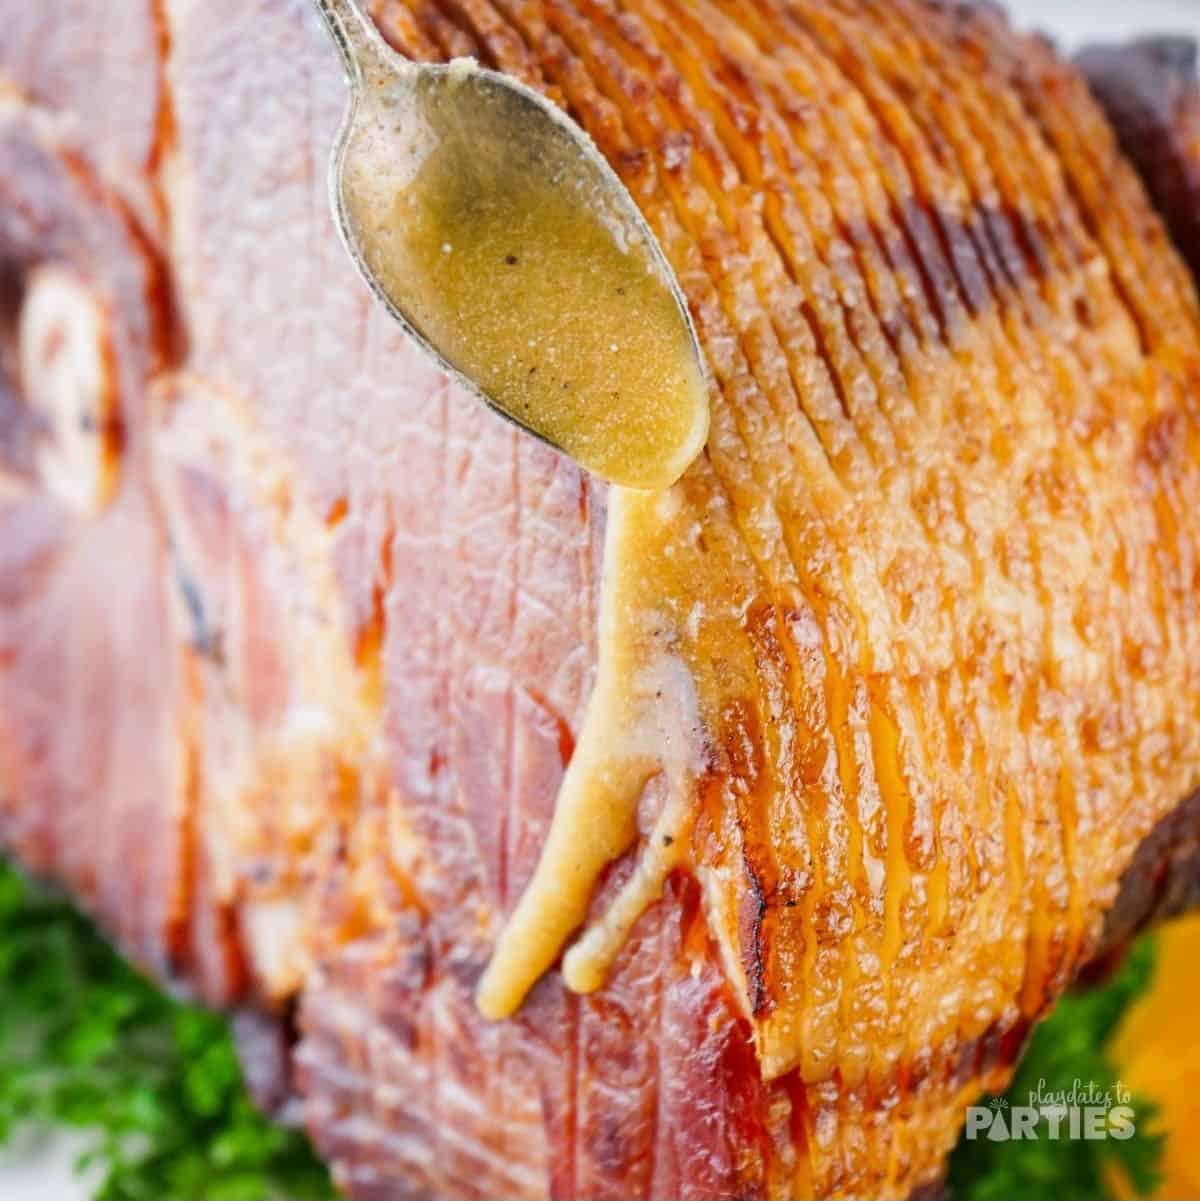 Drizzling glaze down the glaze of a cooked ham.